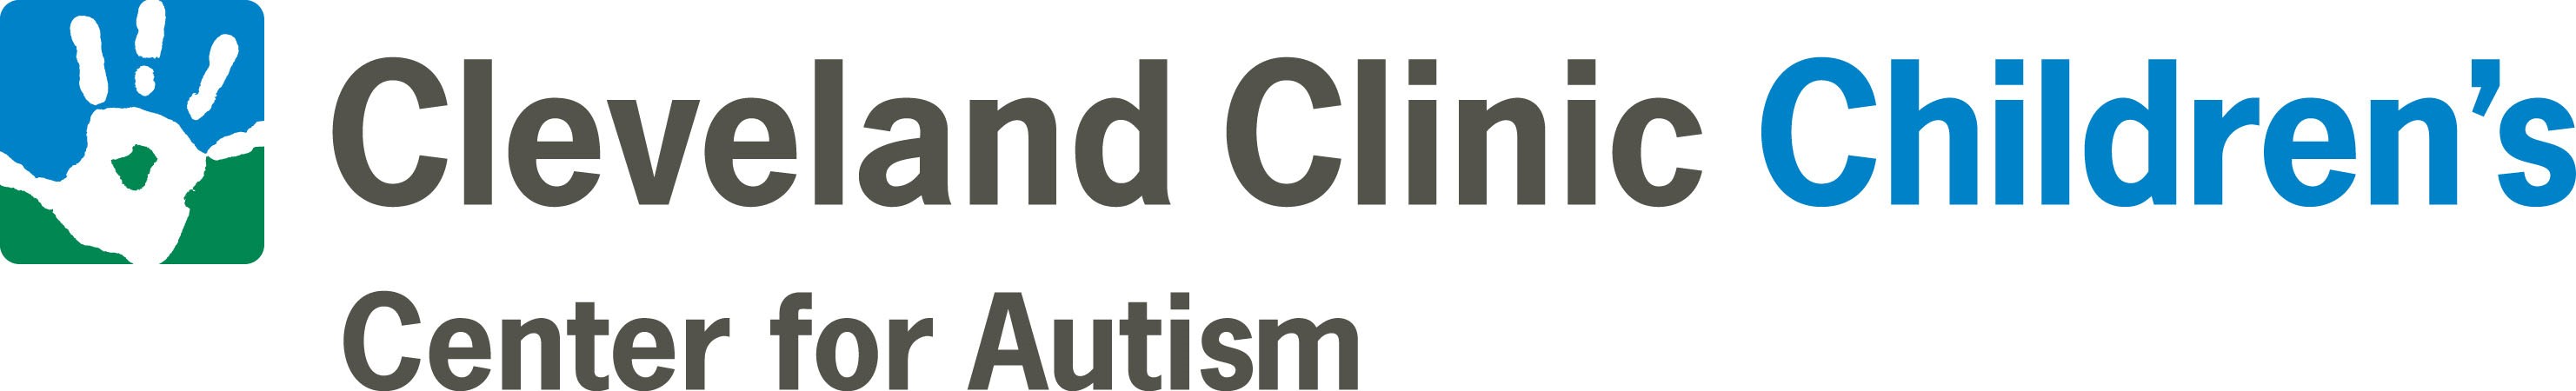 006.5 Cleveland Clinic Center for Autism